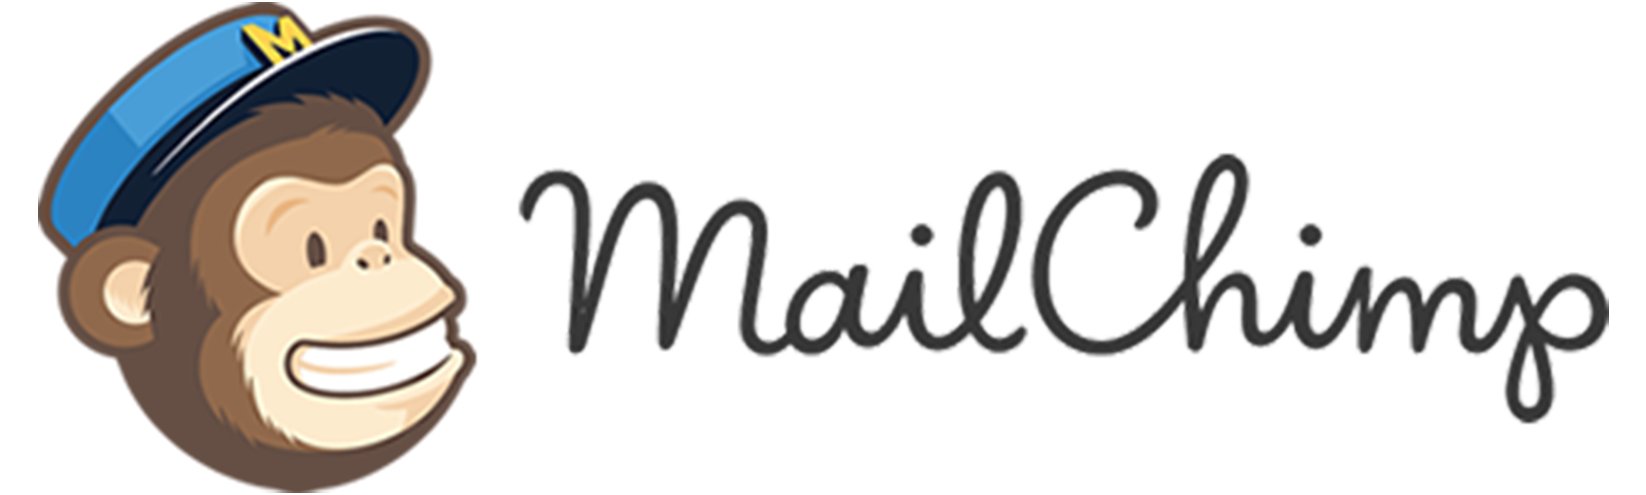 Top email marketing services Mailchimp